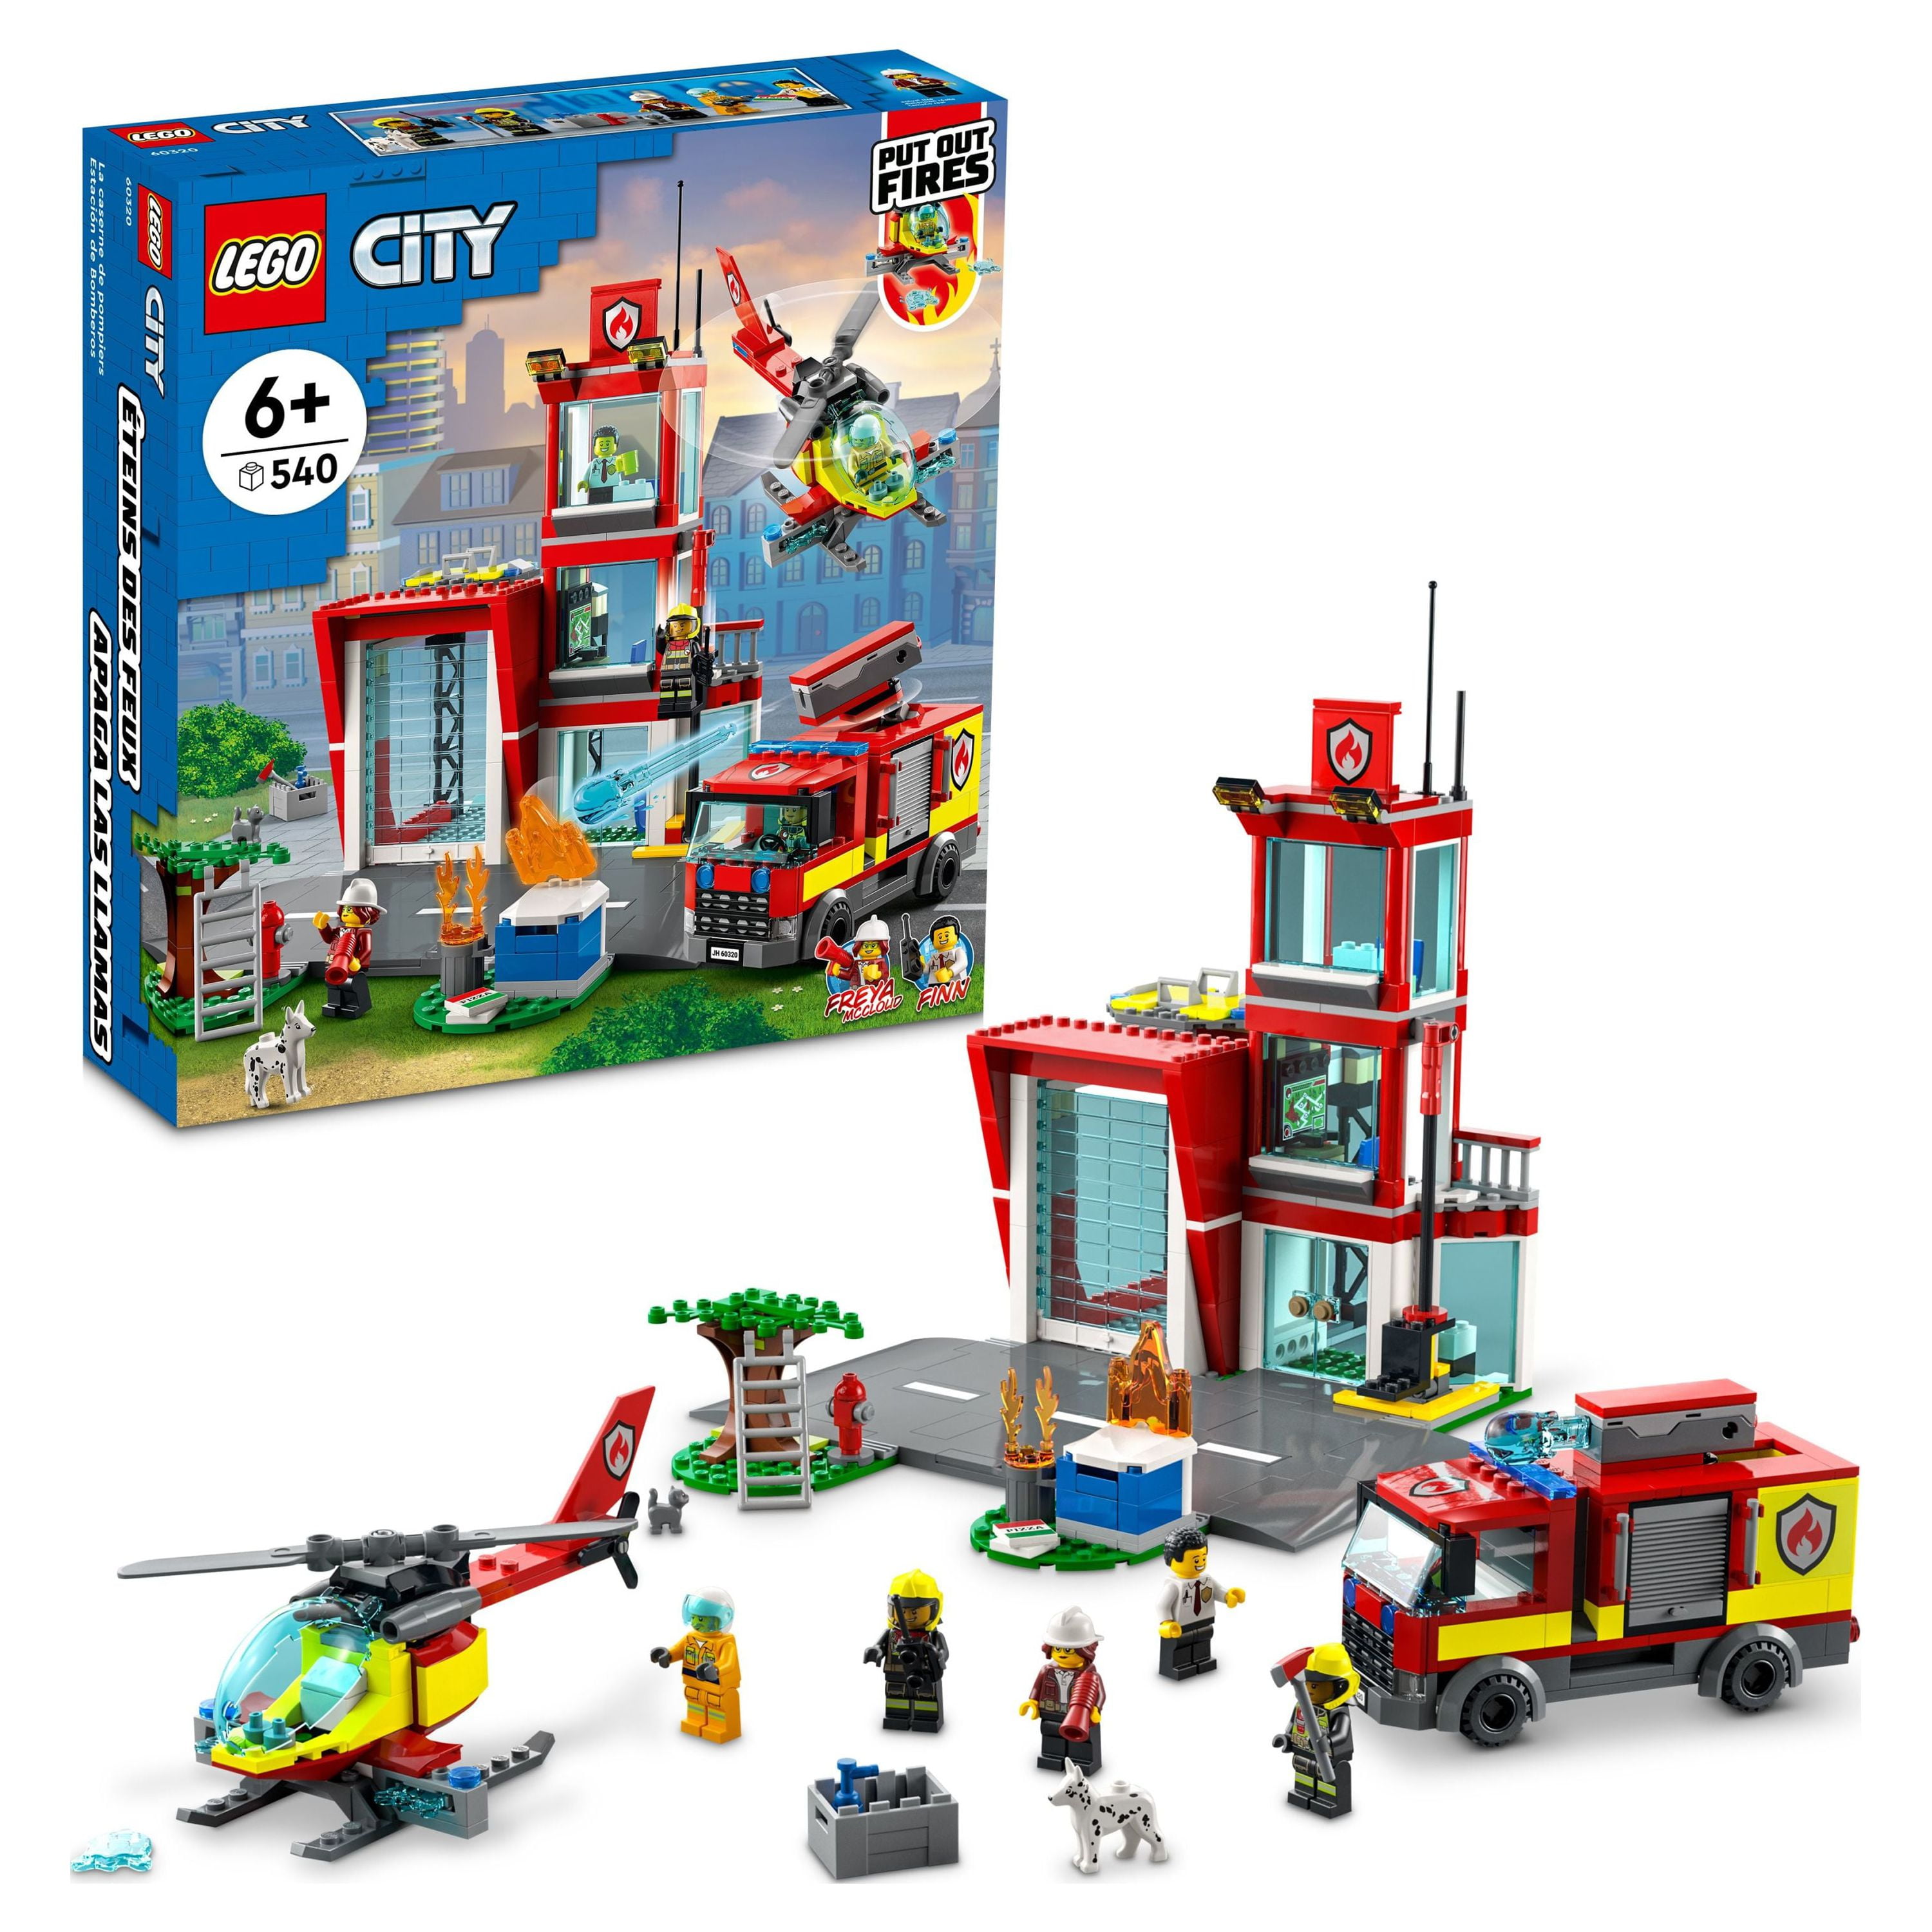 LEGO City Fire Station Set 60320 with Garage, Helicopter & Fire Engine Toys Plus Firefighter Minifigures